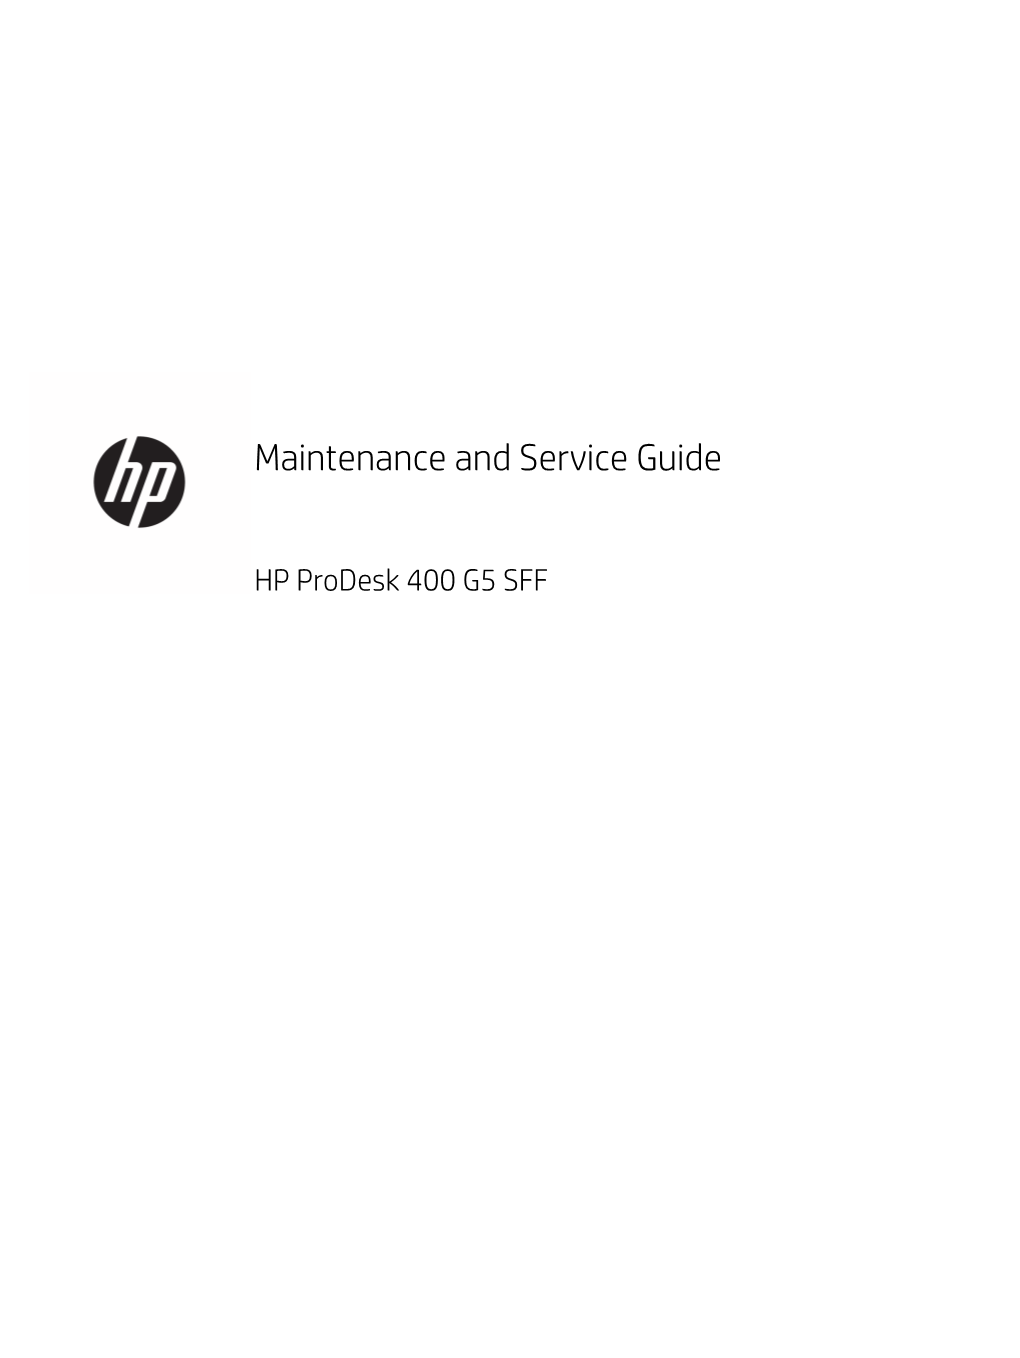 Maintenance and Service Guide HP Prodesk 400 G5